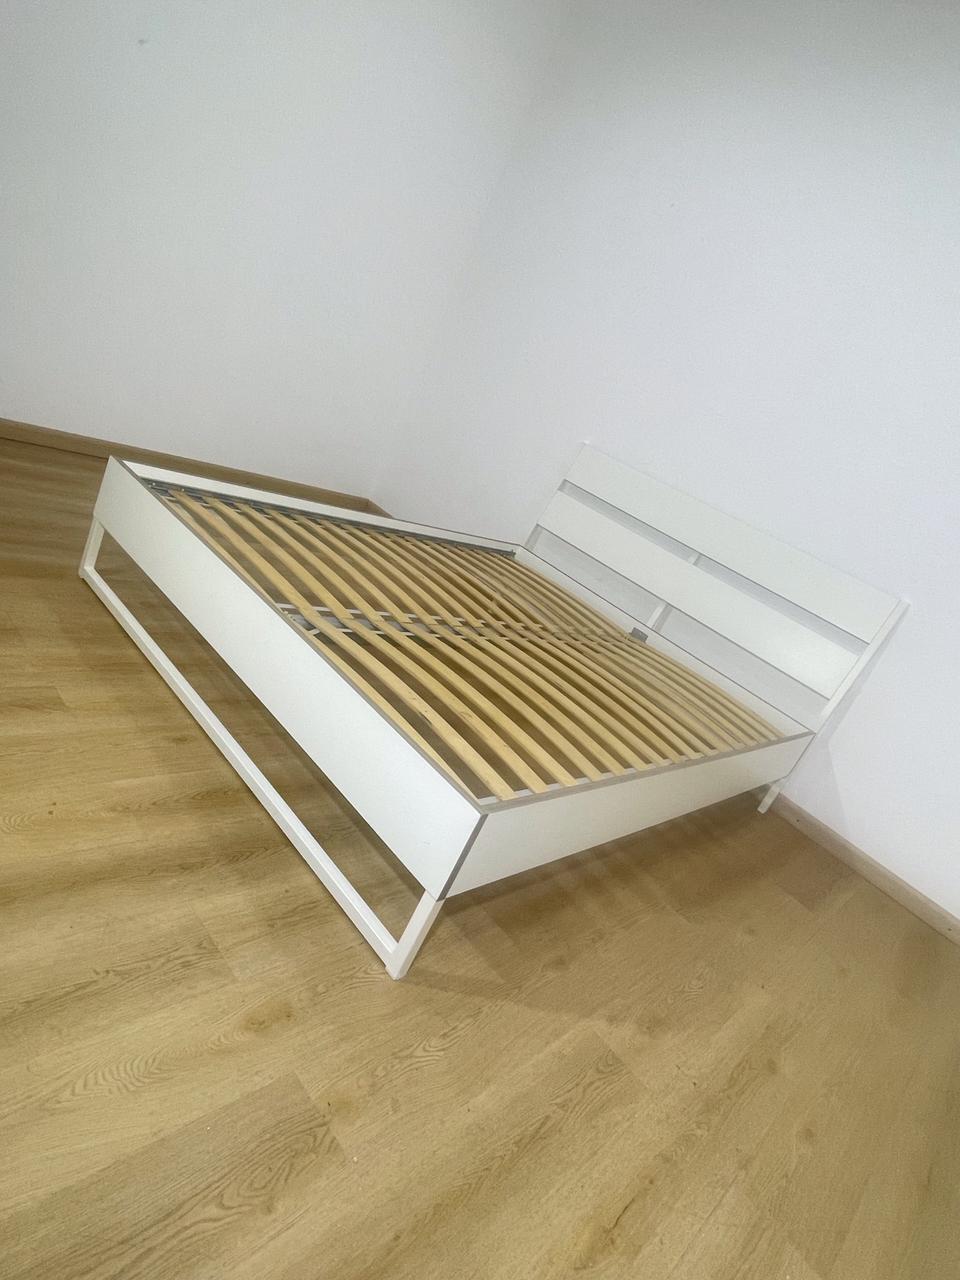 IKEA queen size tyrsil bed frame